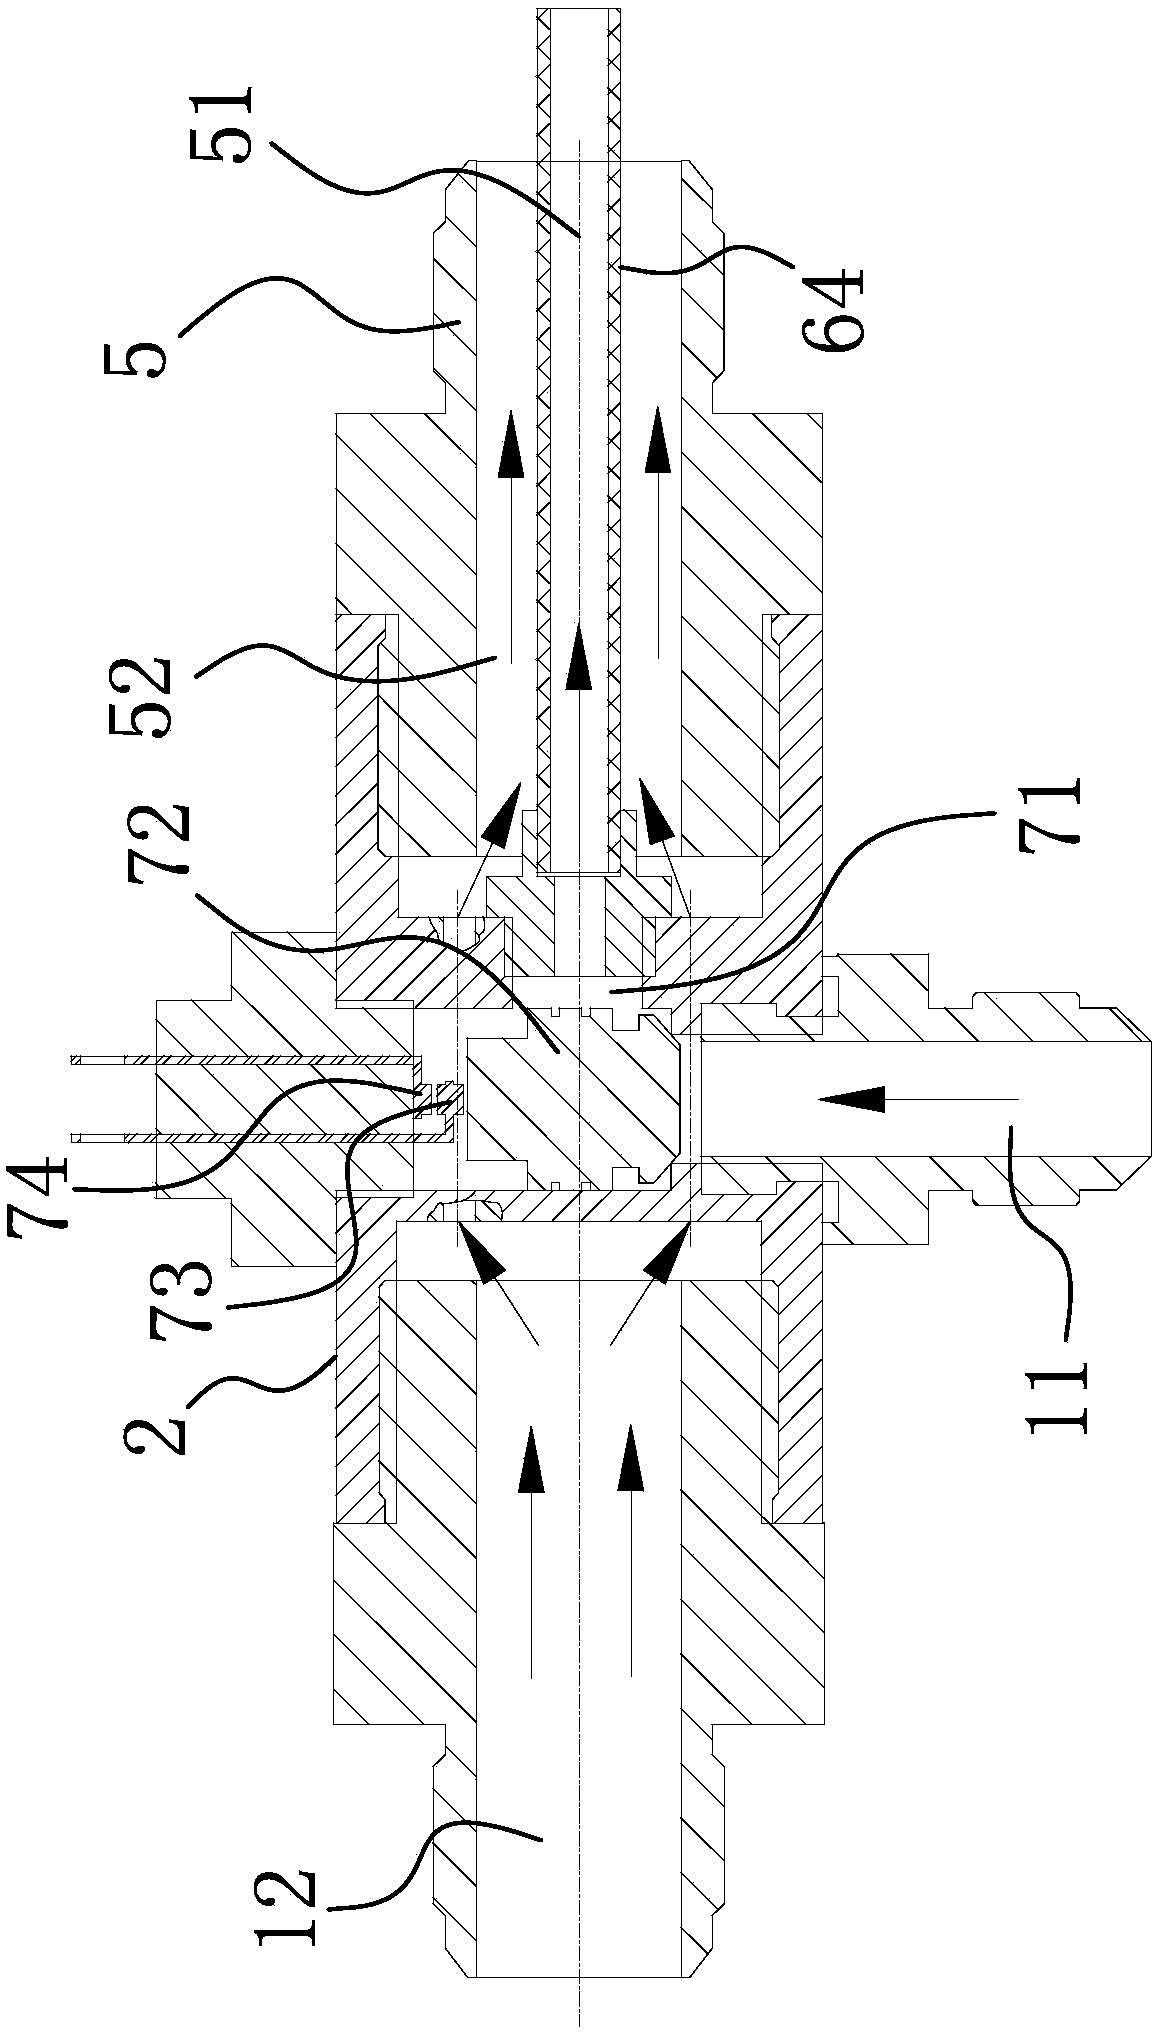 Self-checking oil-gas mixing device